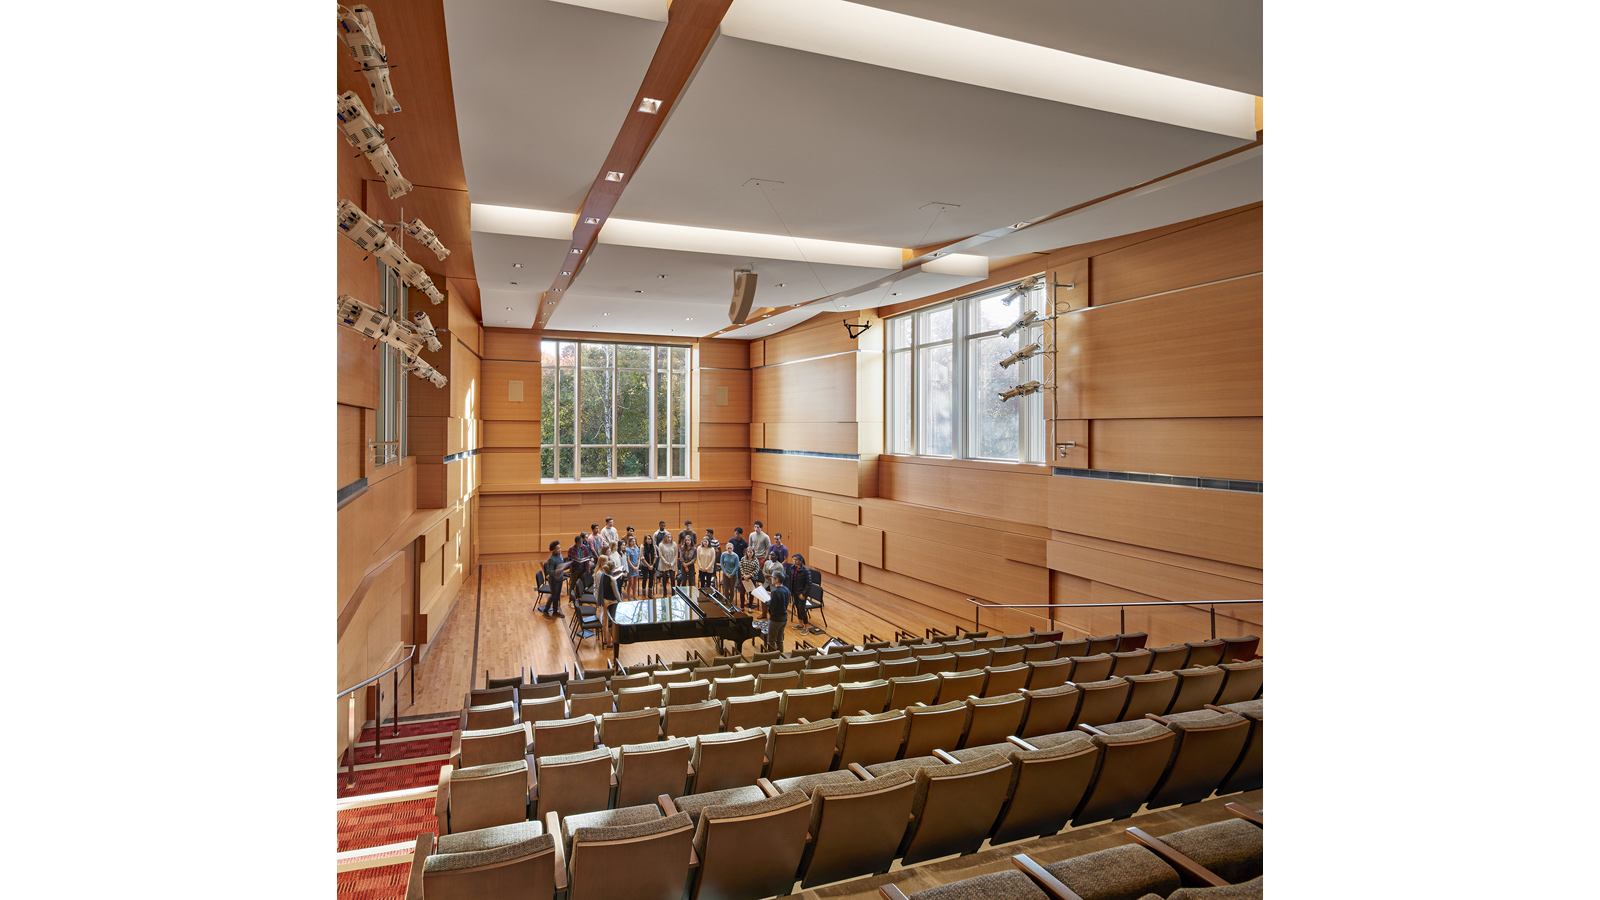 Middlesex Rachel Carson Music and Campus Center recital hall